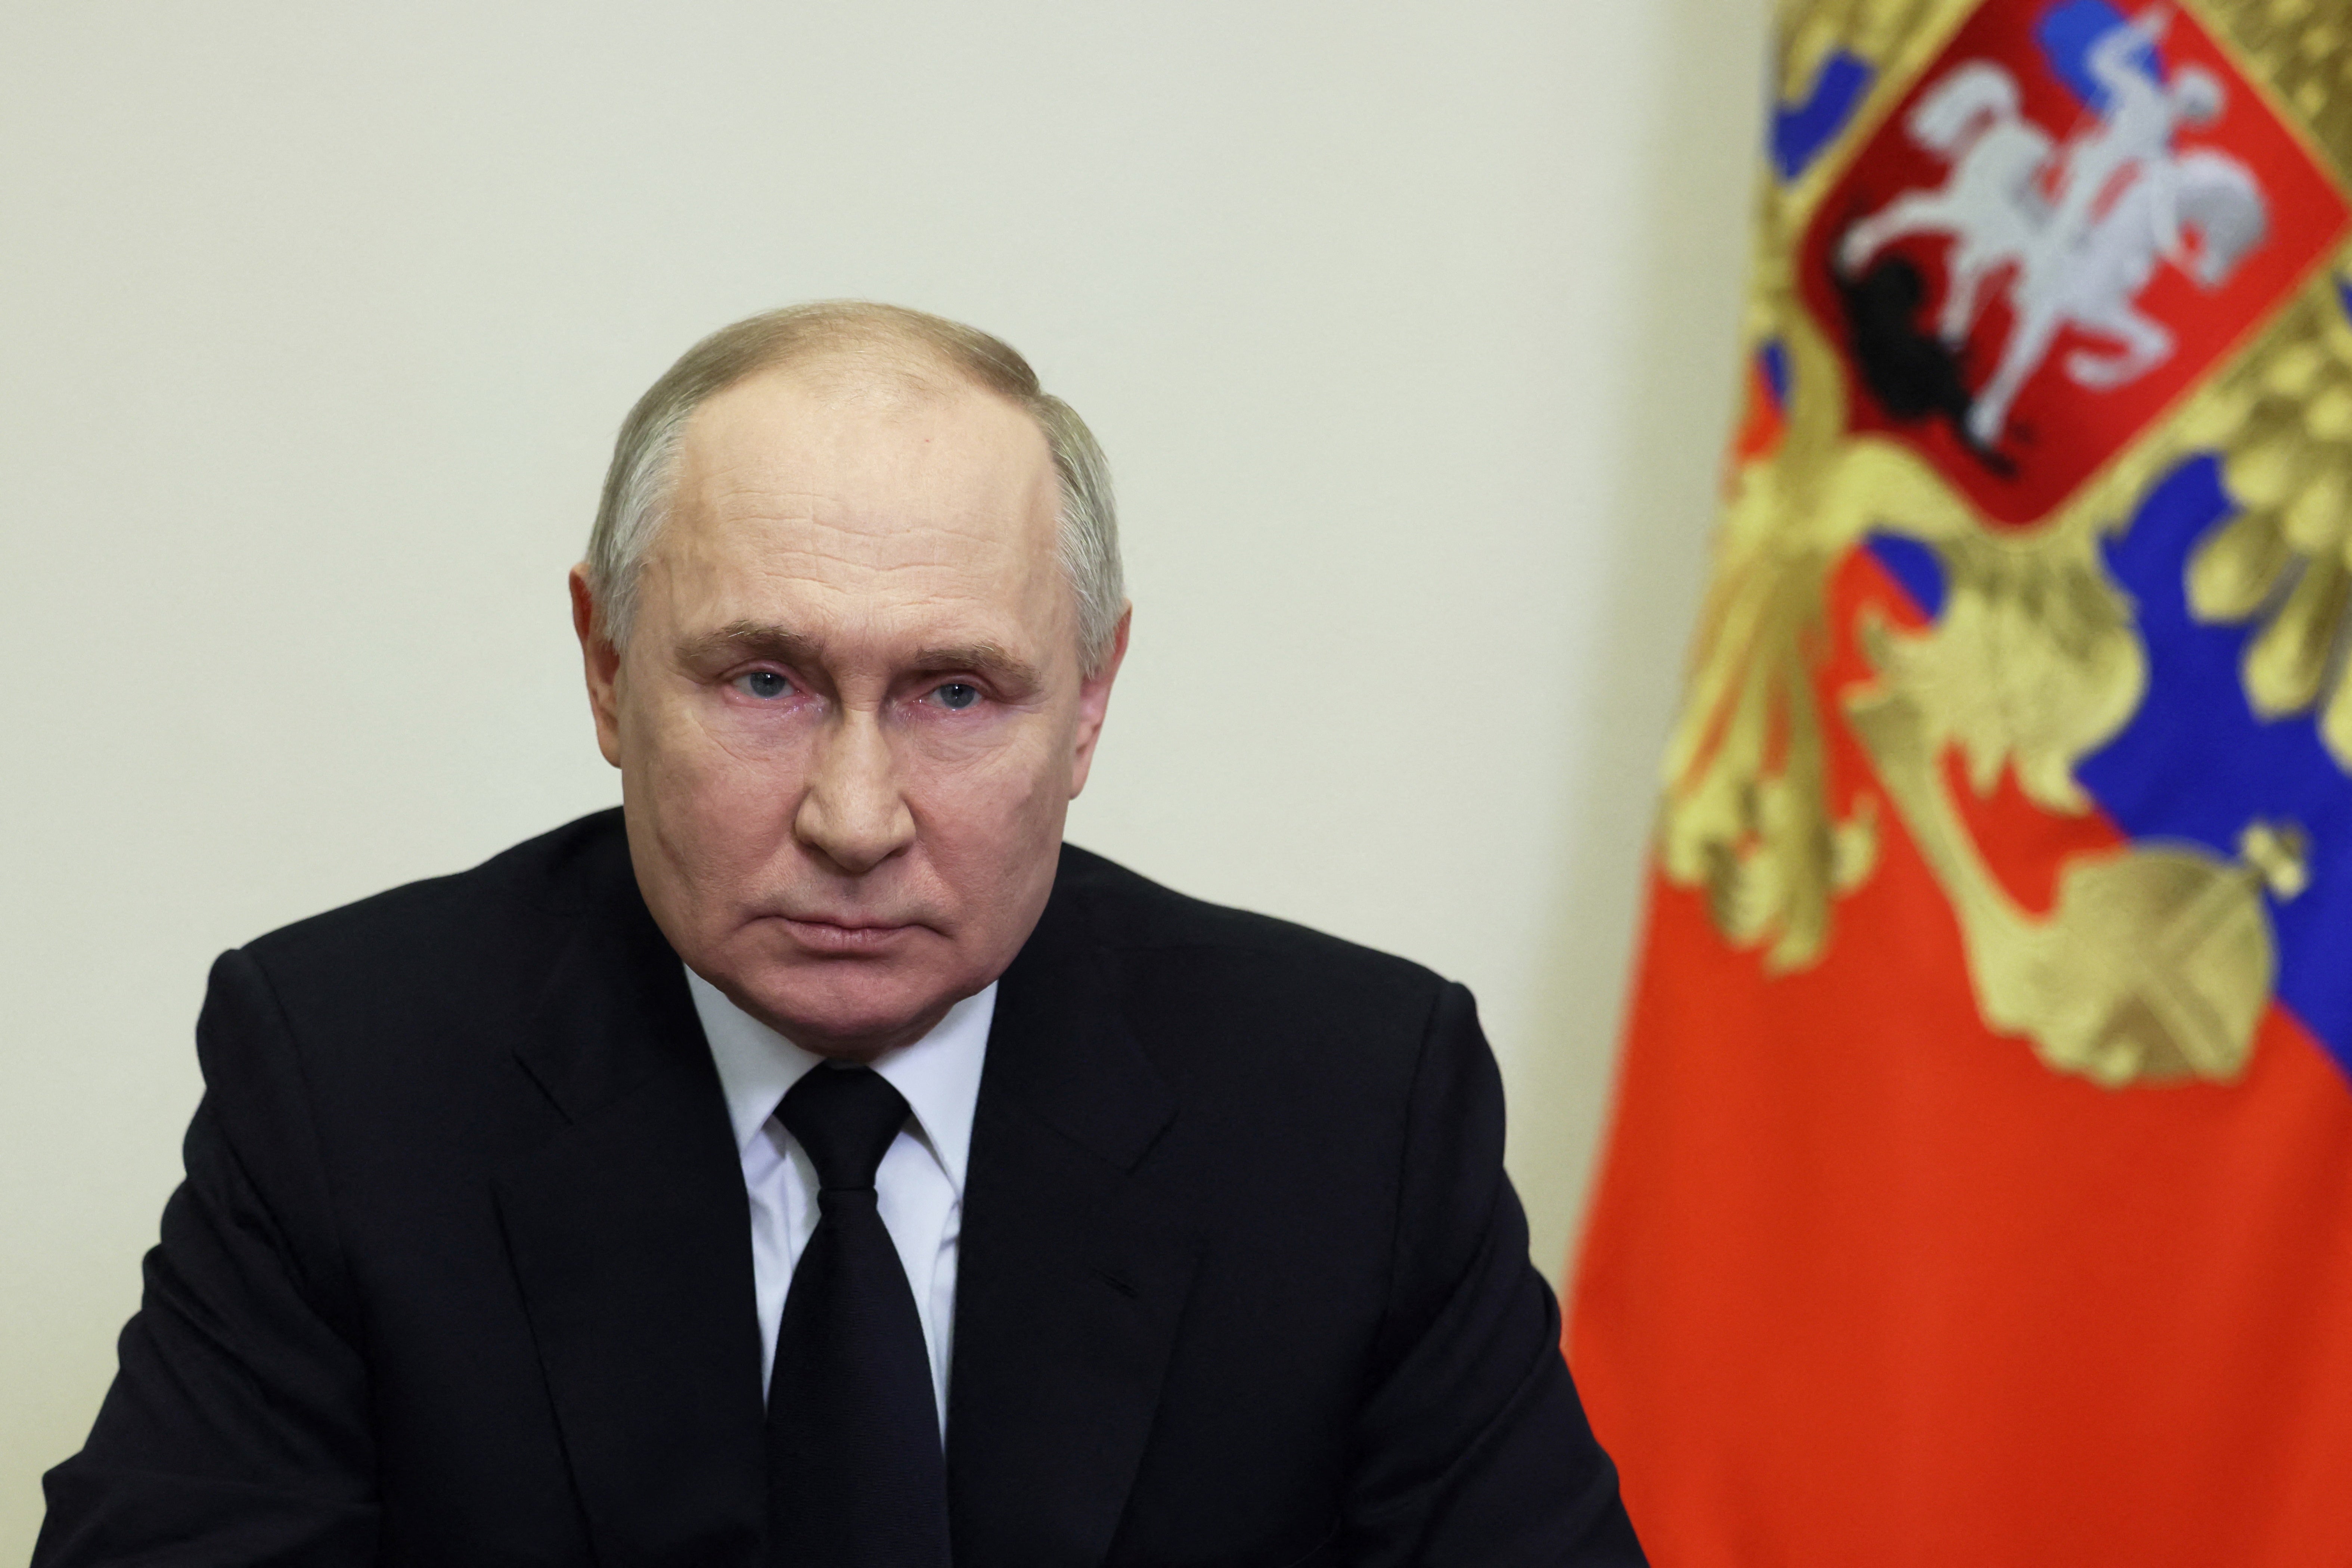 Vladimir Putin has sought to place blame for the attack on Ukraine